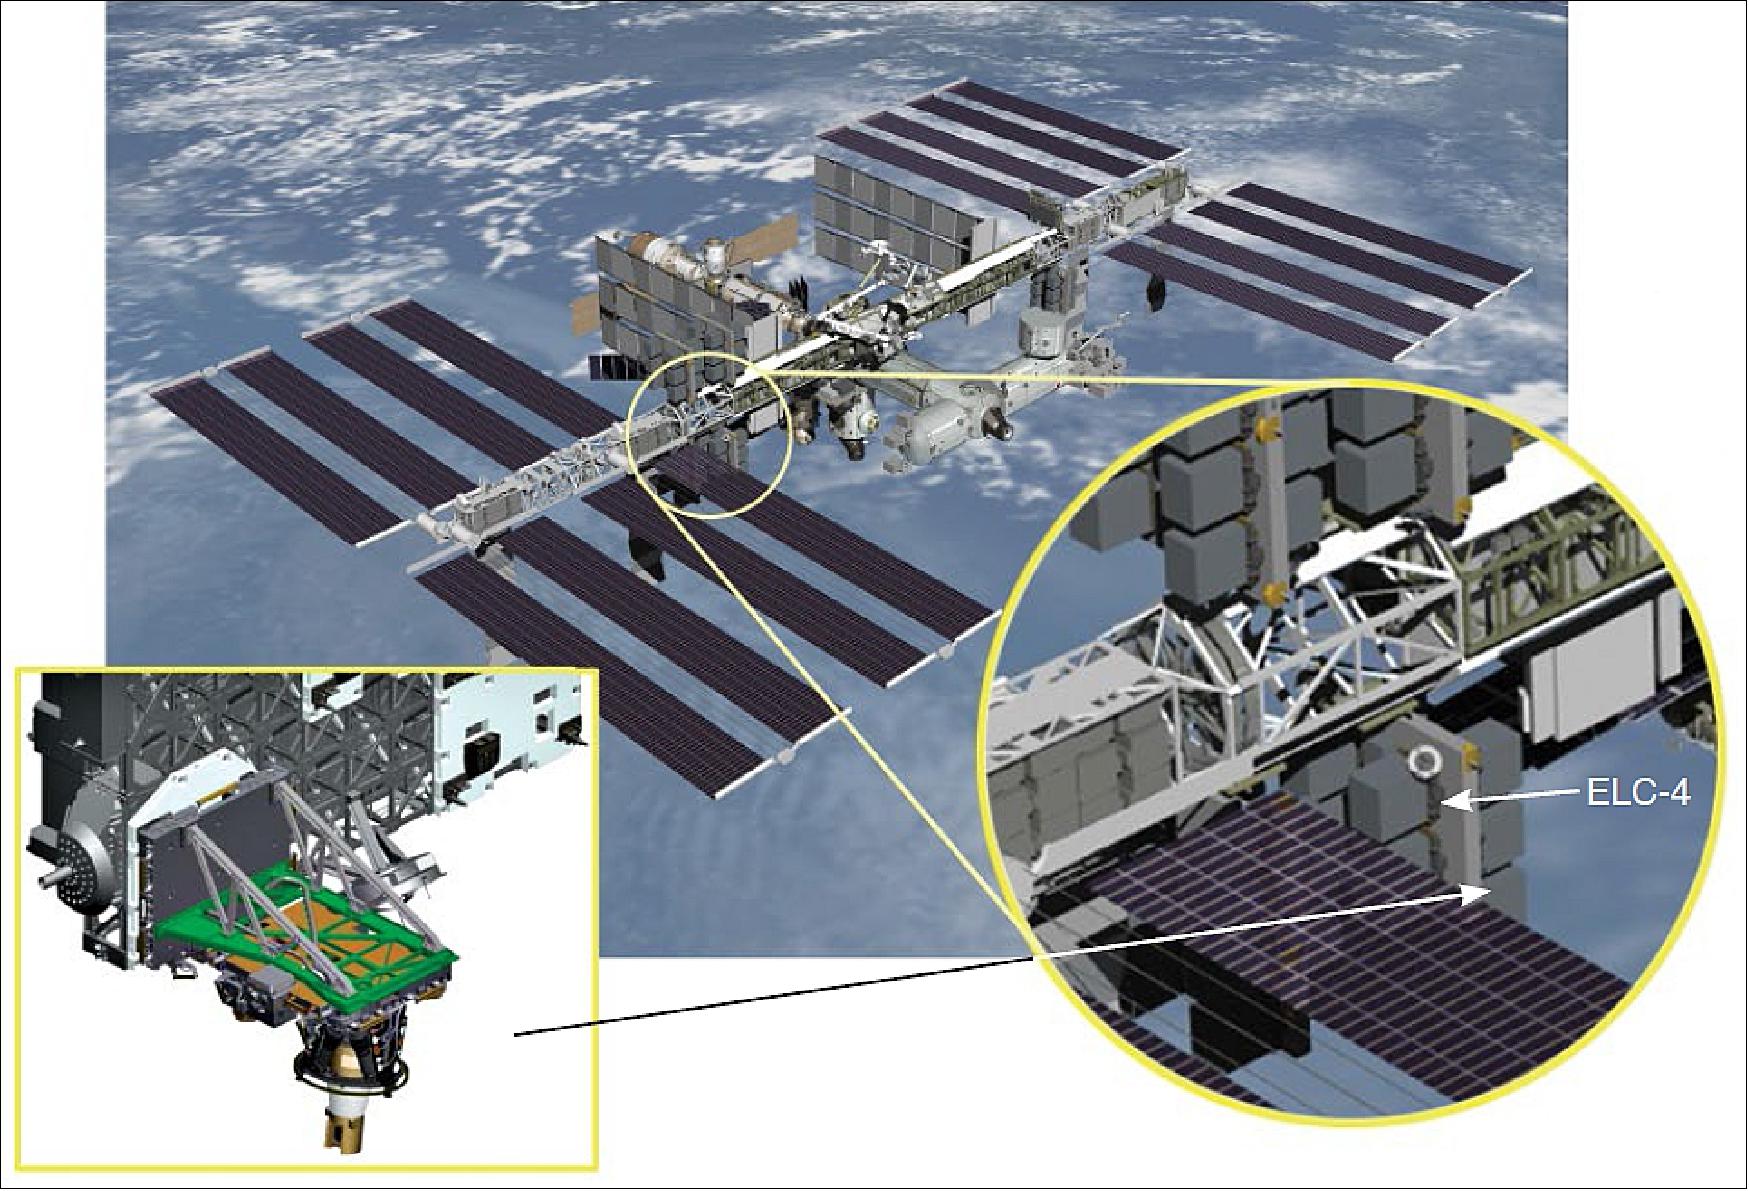 Figure 5: This illustration shows the Instrument Payload attached to the Nadir Viewing Platform on the ELC-4 (image credit: NASA)